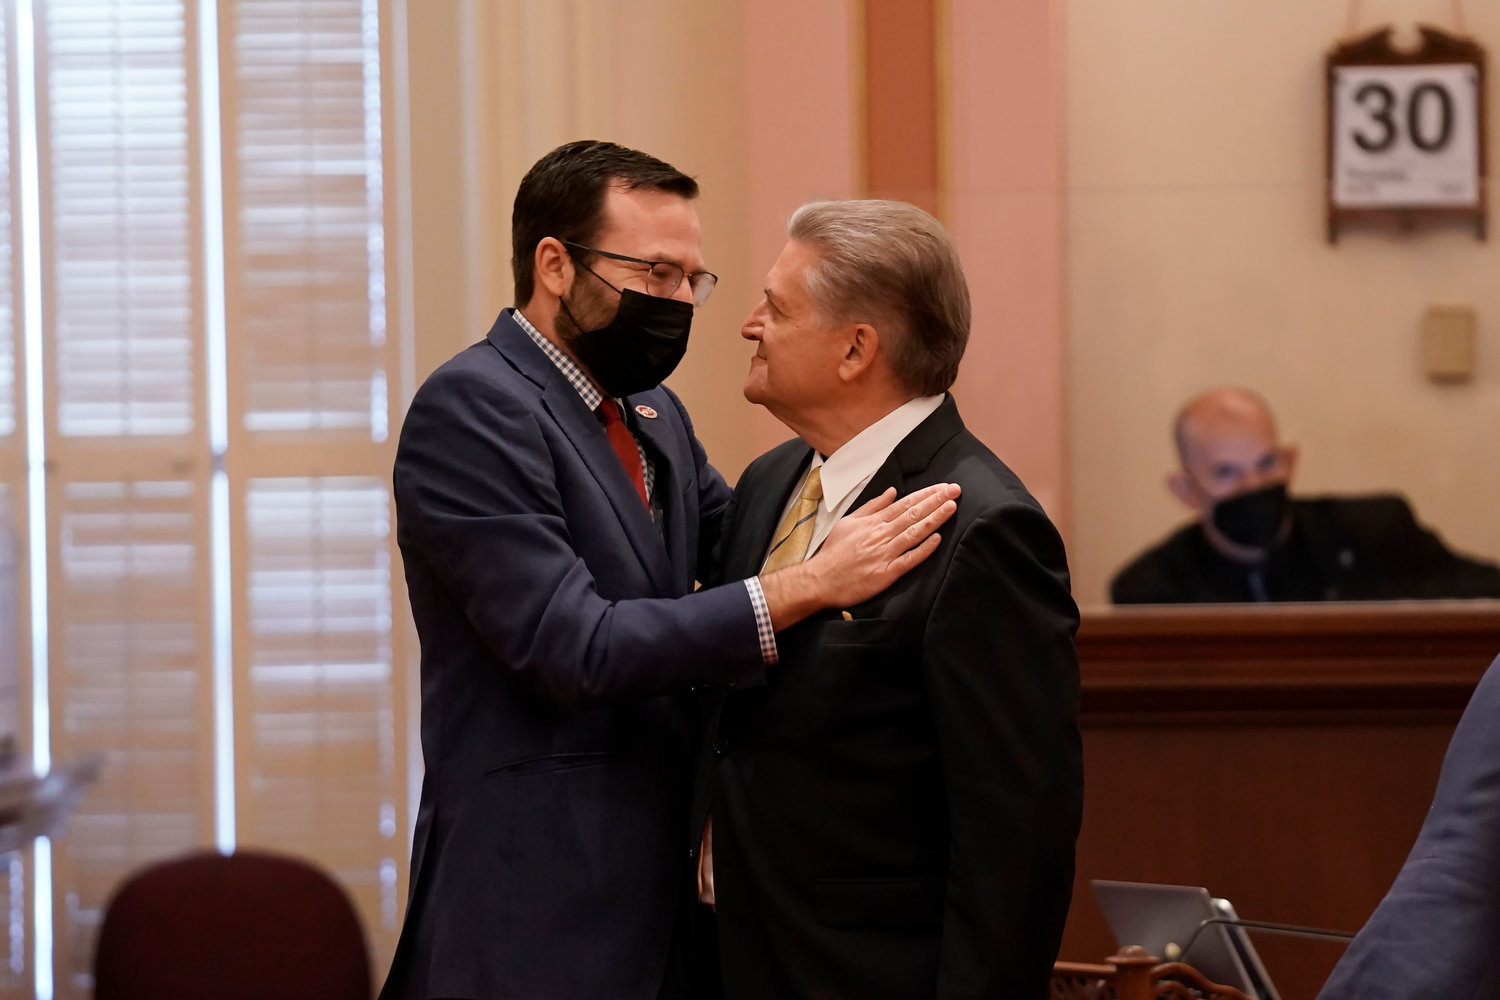 California state Sen. Ben Allen, D-Santa Monica, left, is congratulated by Sen. Bob Hertzberg, D-Van Nuys, after his measure aimed at reducing plastic packaging passed the state Senate at the Capitol in Sacramento, Calif., Thursday, June 30, 2022. It says makers of single-use plastic products must reduce the use of the material 25% by 2032.The bill now goes to Gov. Gavin Newsom. (AP Photo/Rich Pedroncelli)